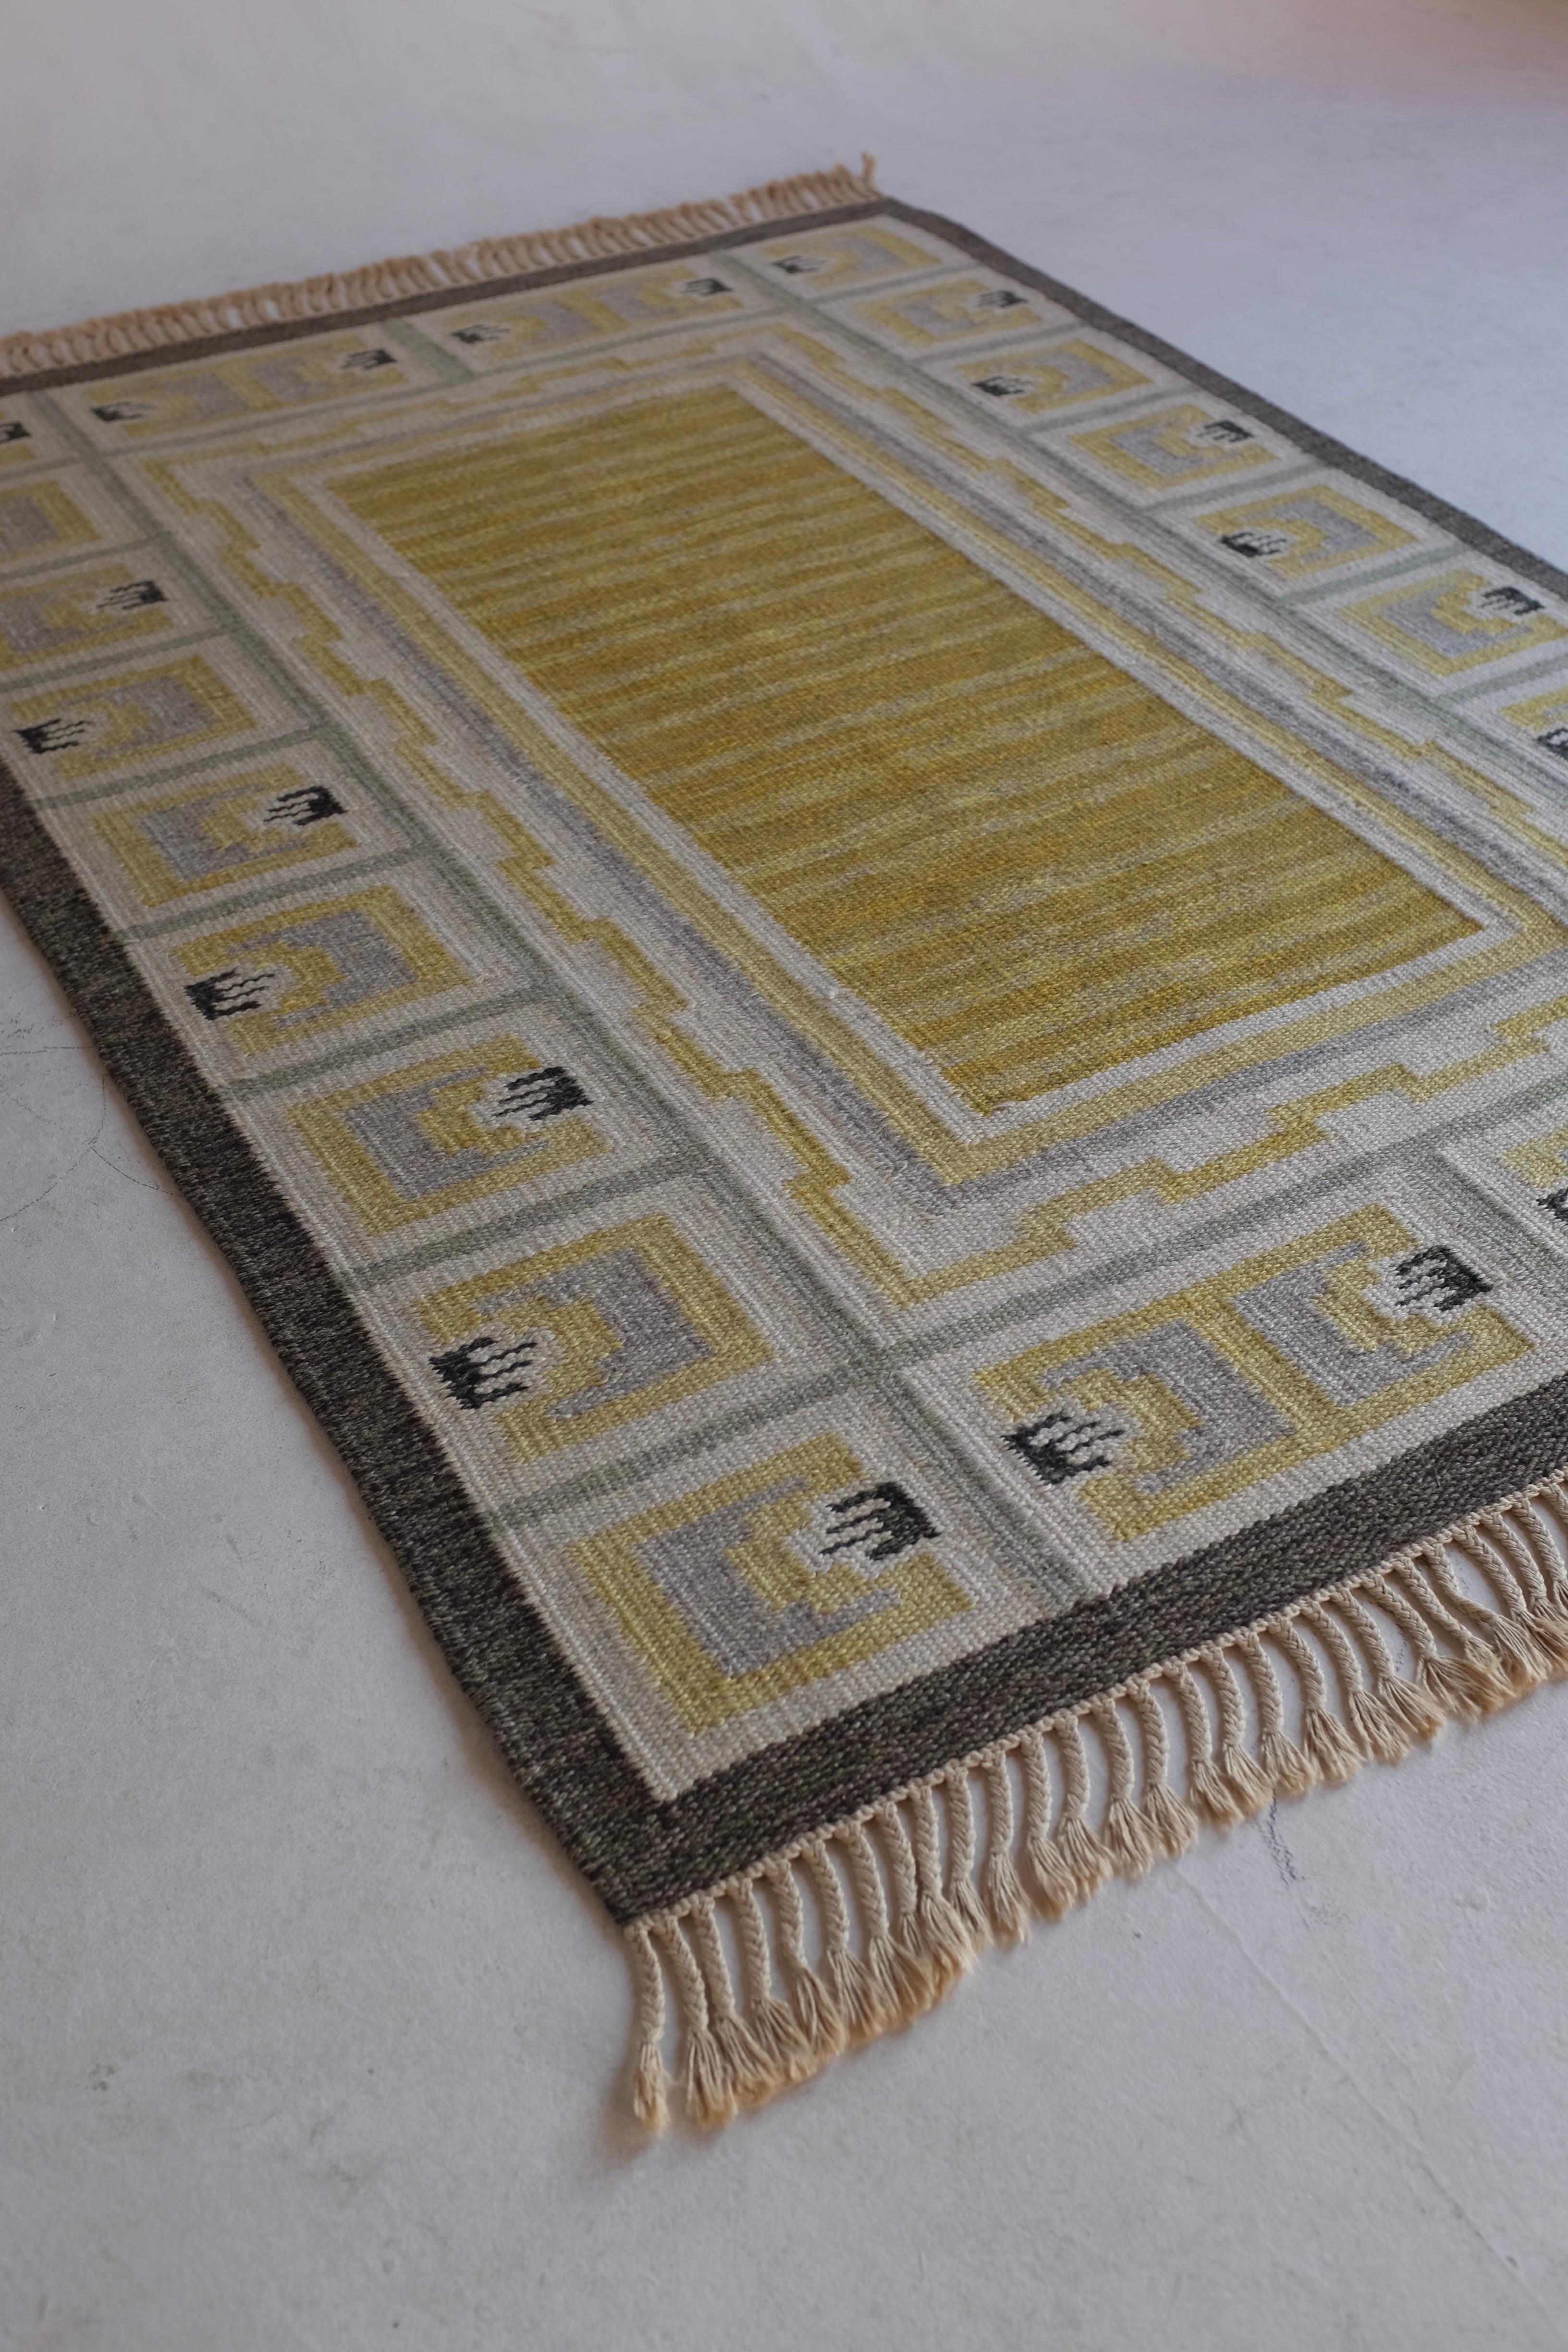 1940's Swedish Rug by Aina Kånge. Beautiful Neo classic design in yellow, gray and green colored pattern against a white colored bottom. In a very good vintage with all fringes intact. 

Dimensions: L 82 in. x W 52 in. 